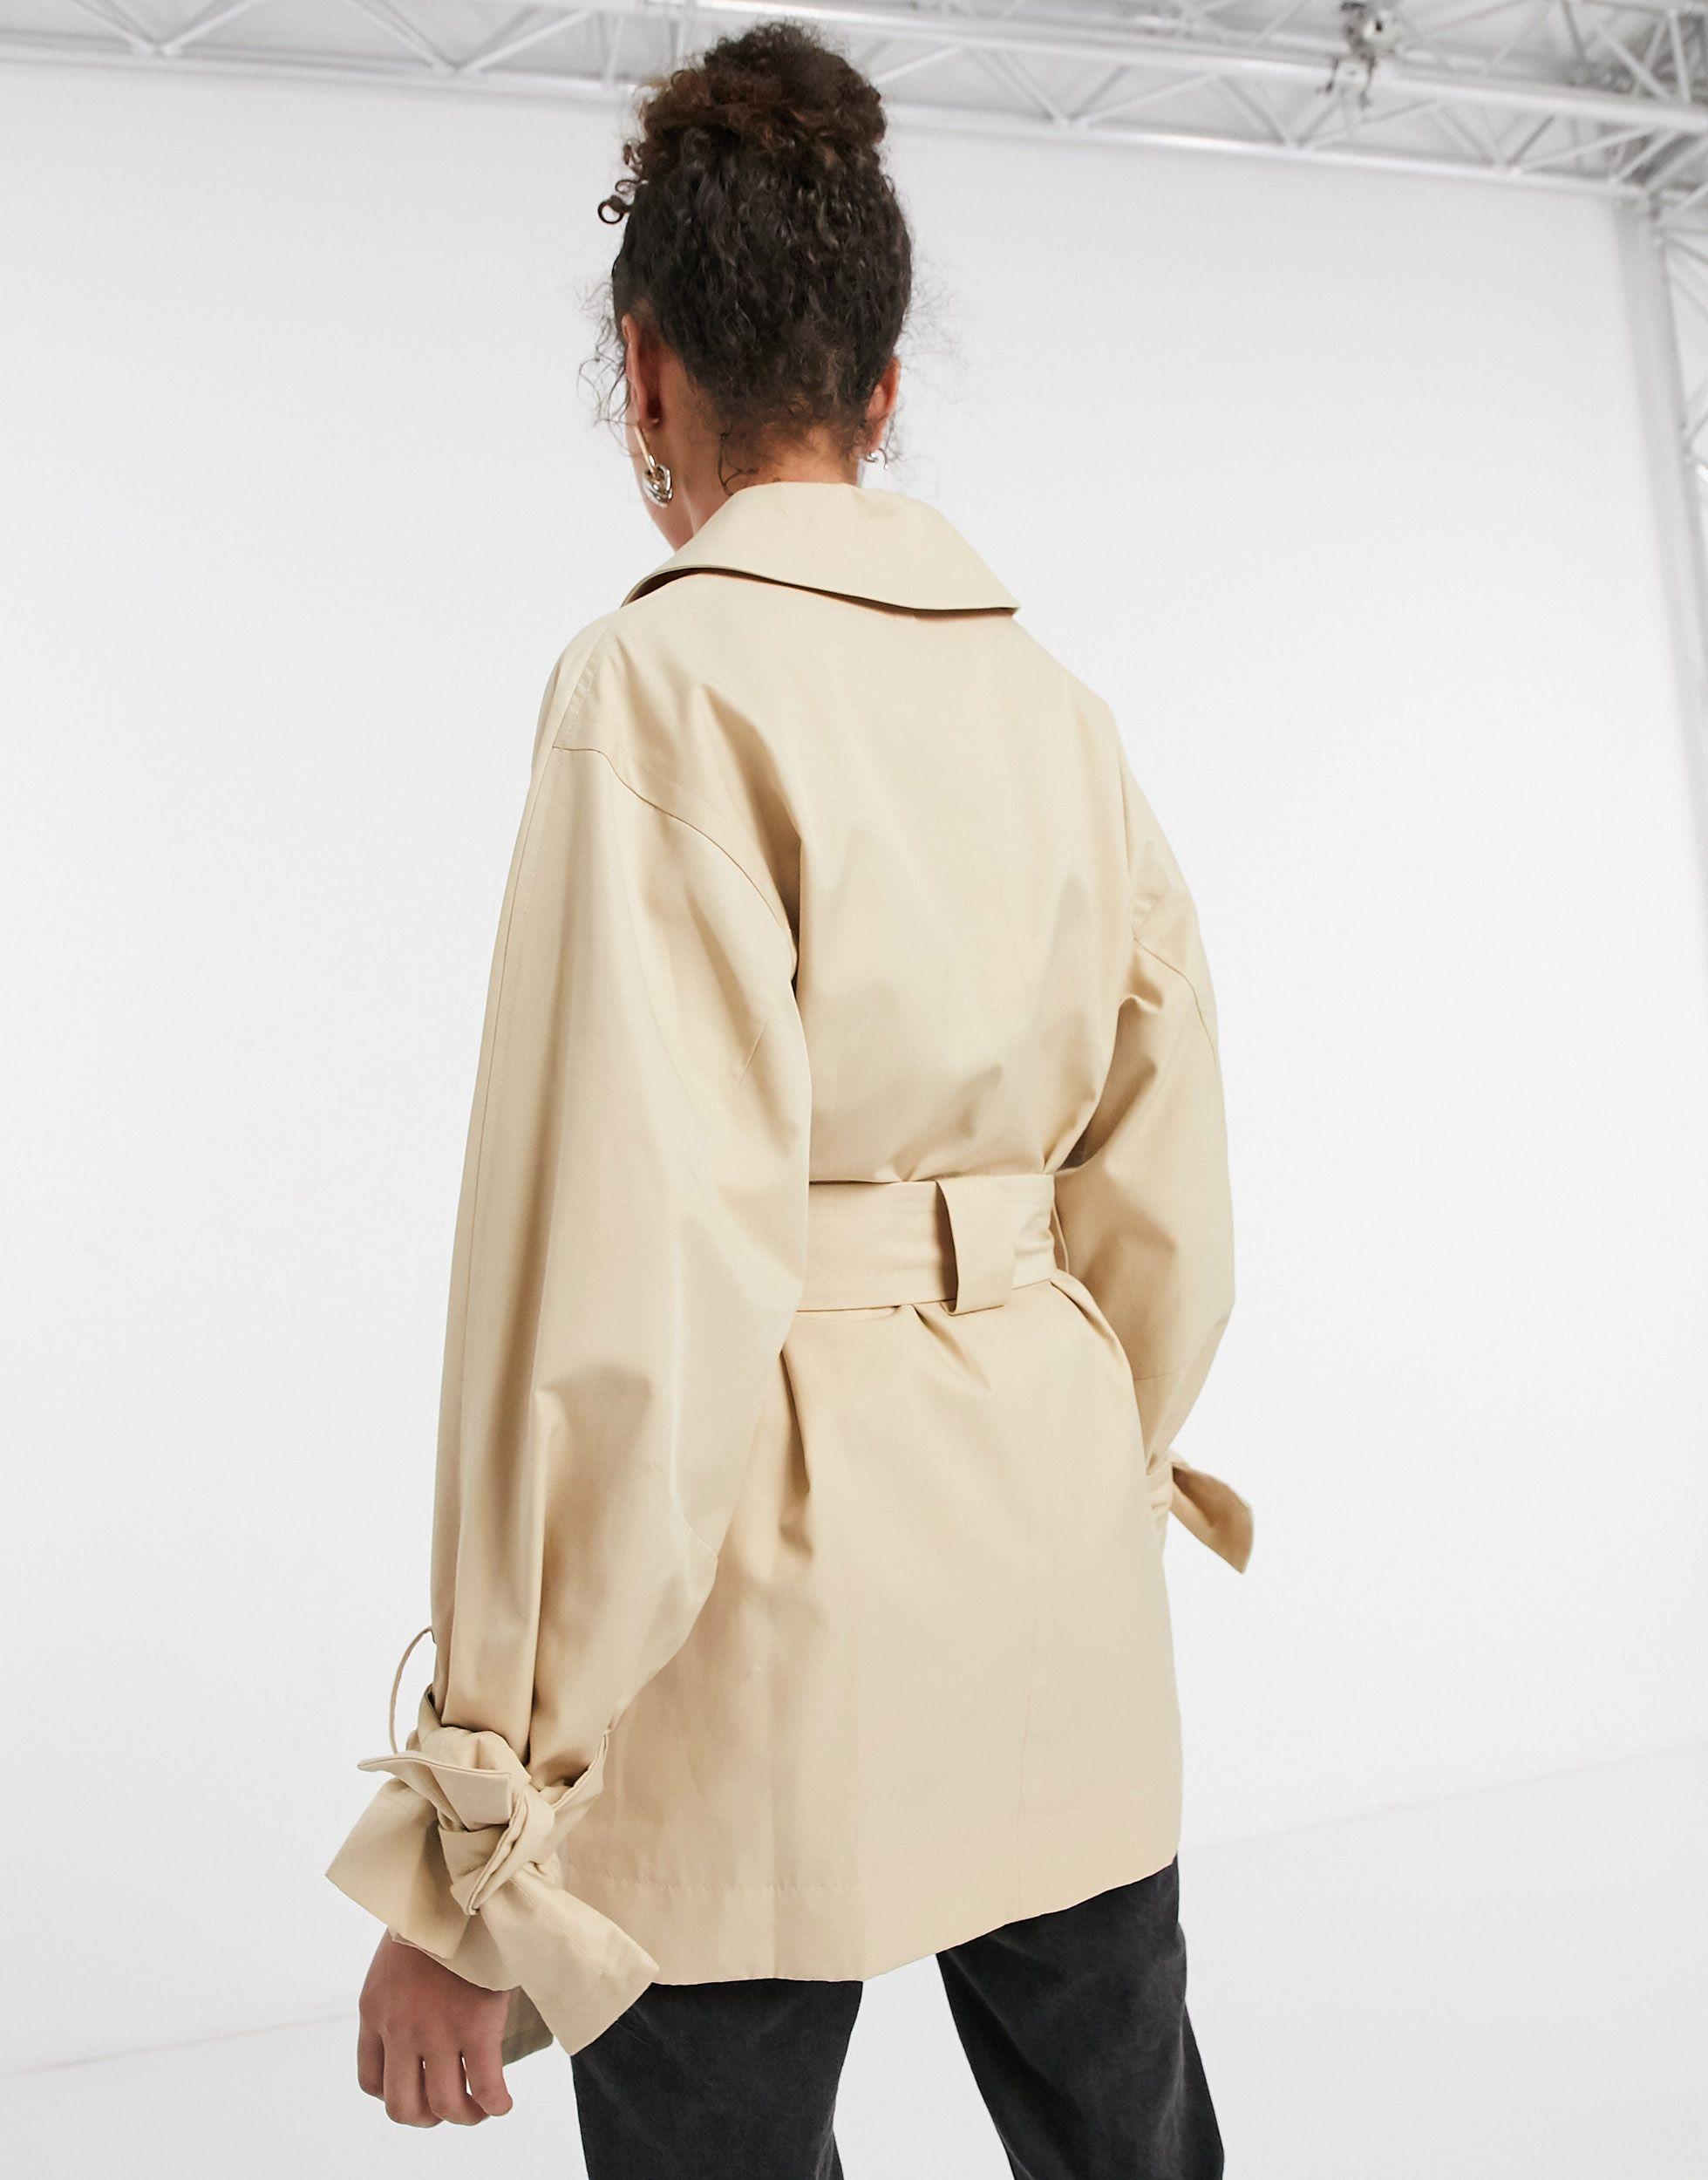 TOPSHOP Cropped Trench Coat in Cream (Natural) - Lyst